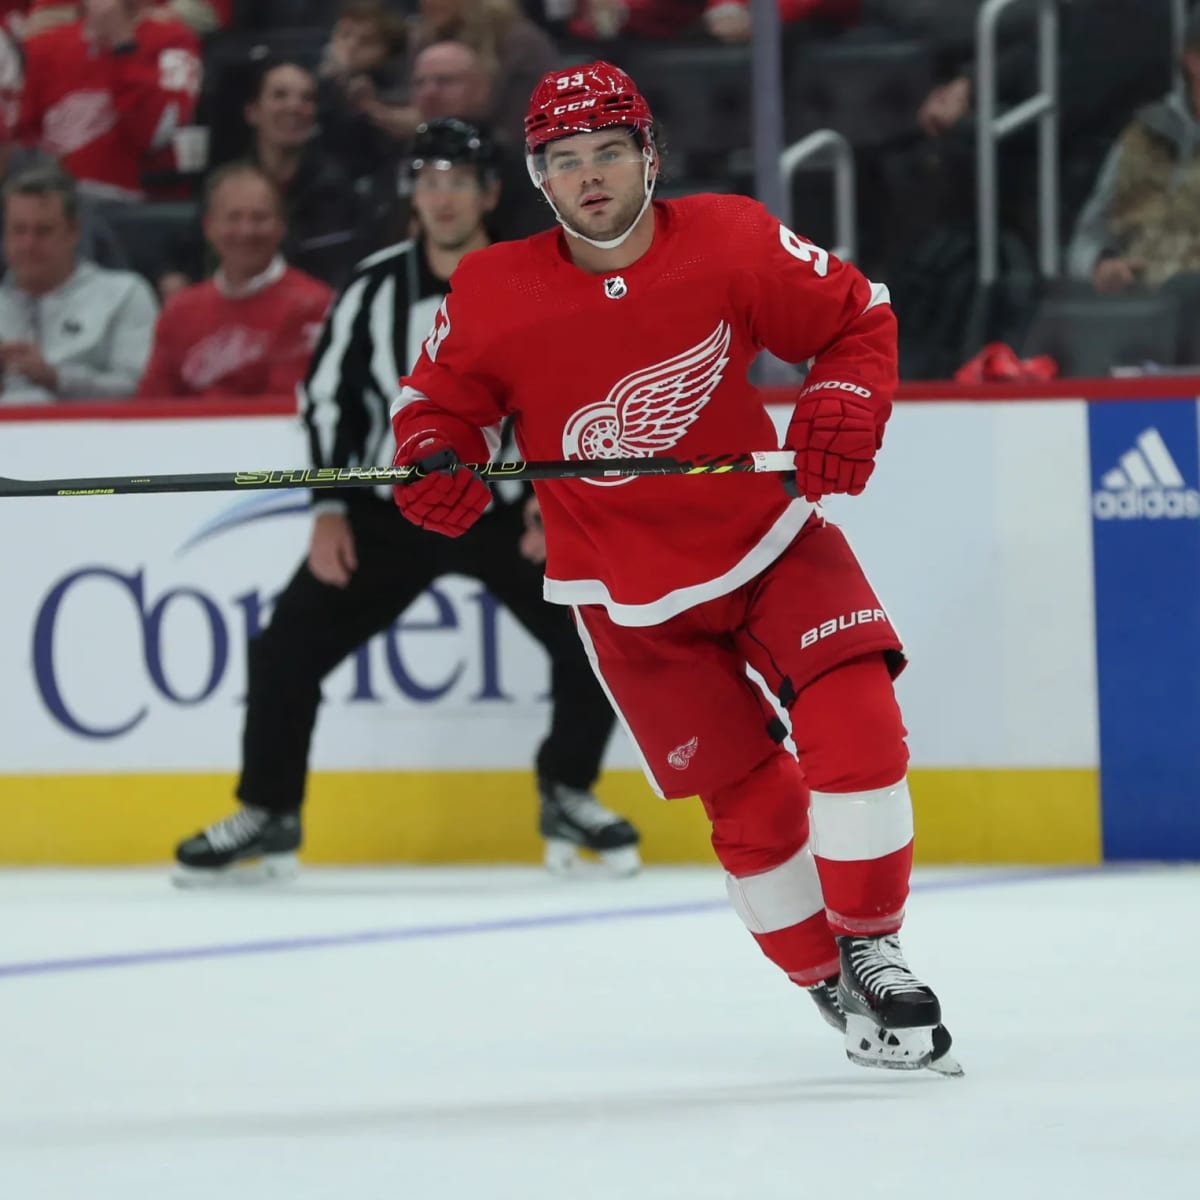 Will Jakob Chychrun Score a Goal Against the Red Wings on October 21?